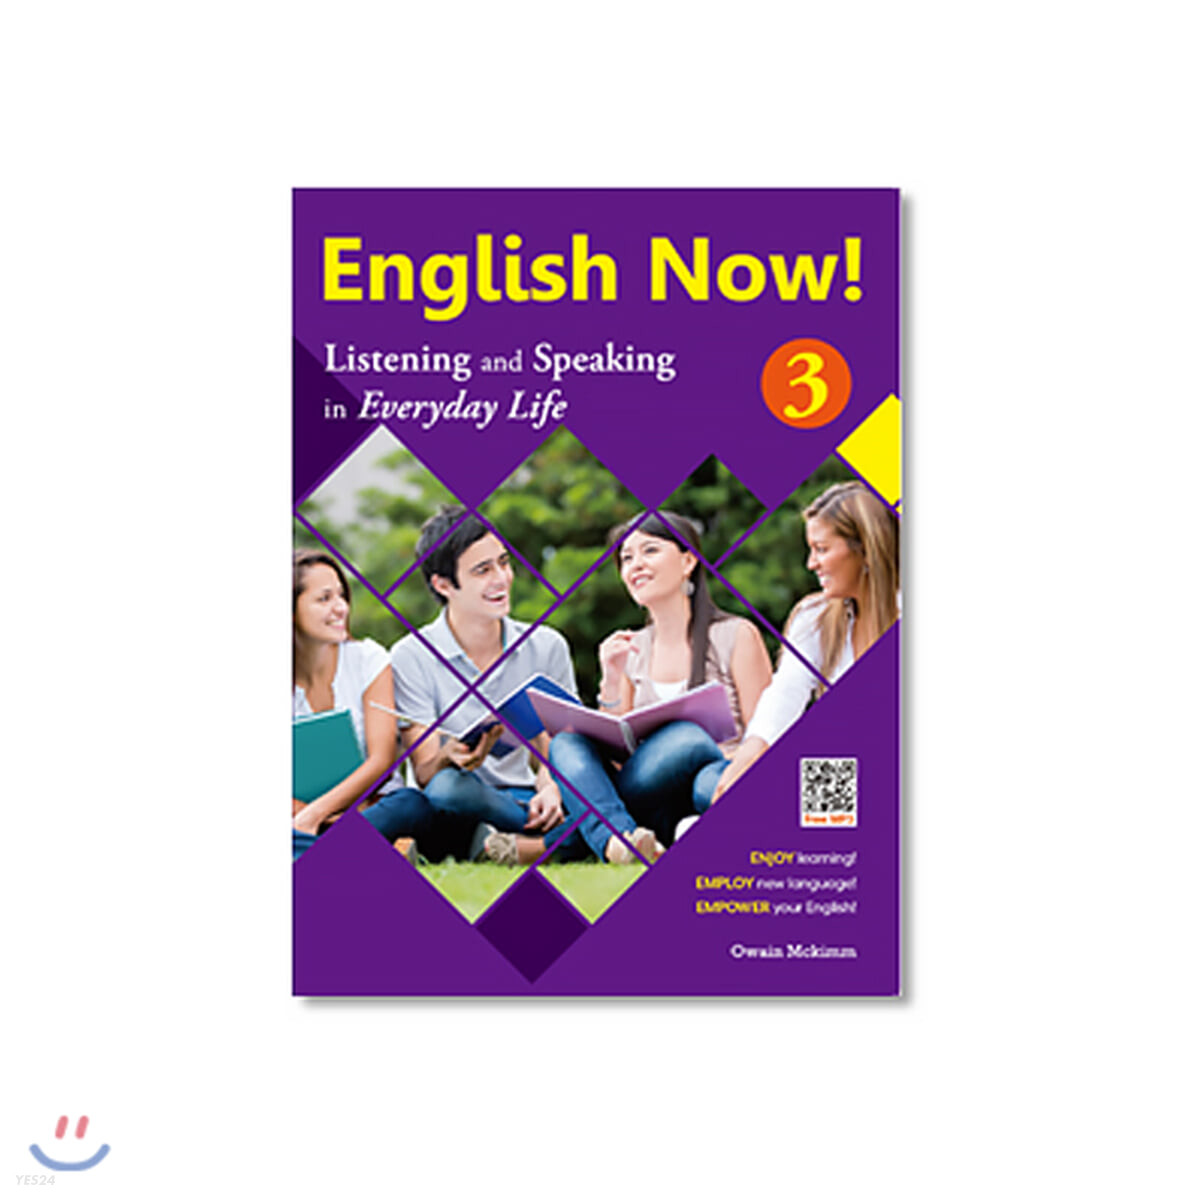 English Now! 3 (Listening and Speaking in Everyday Life)